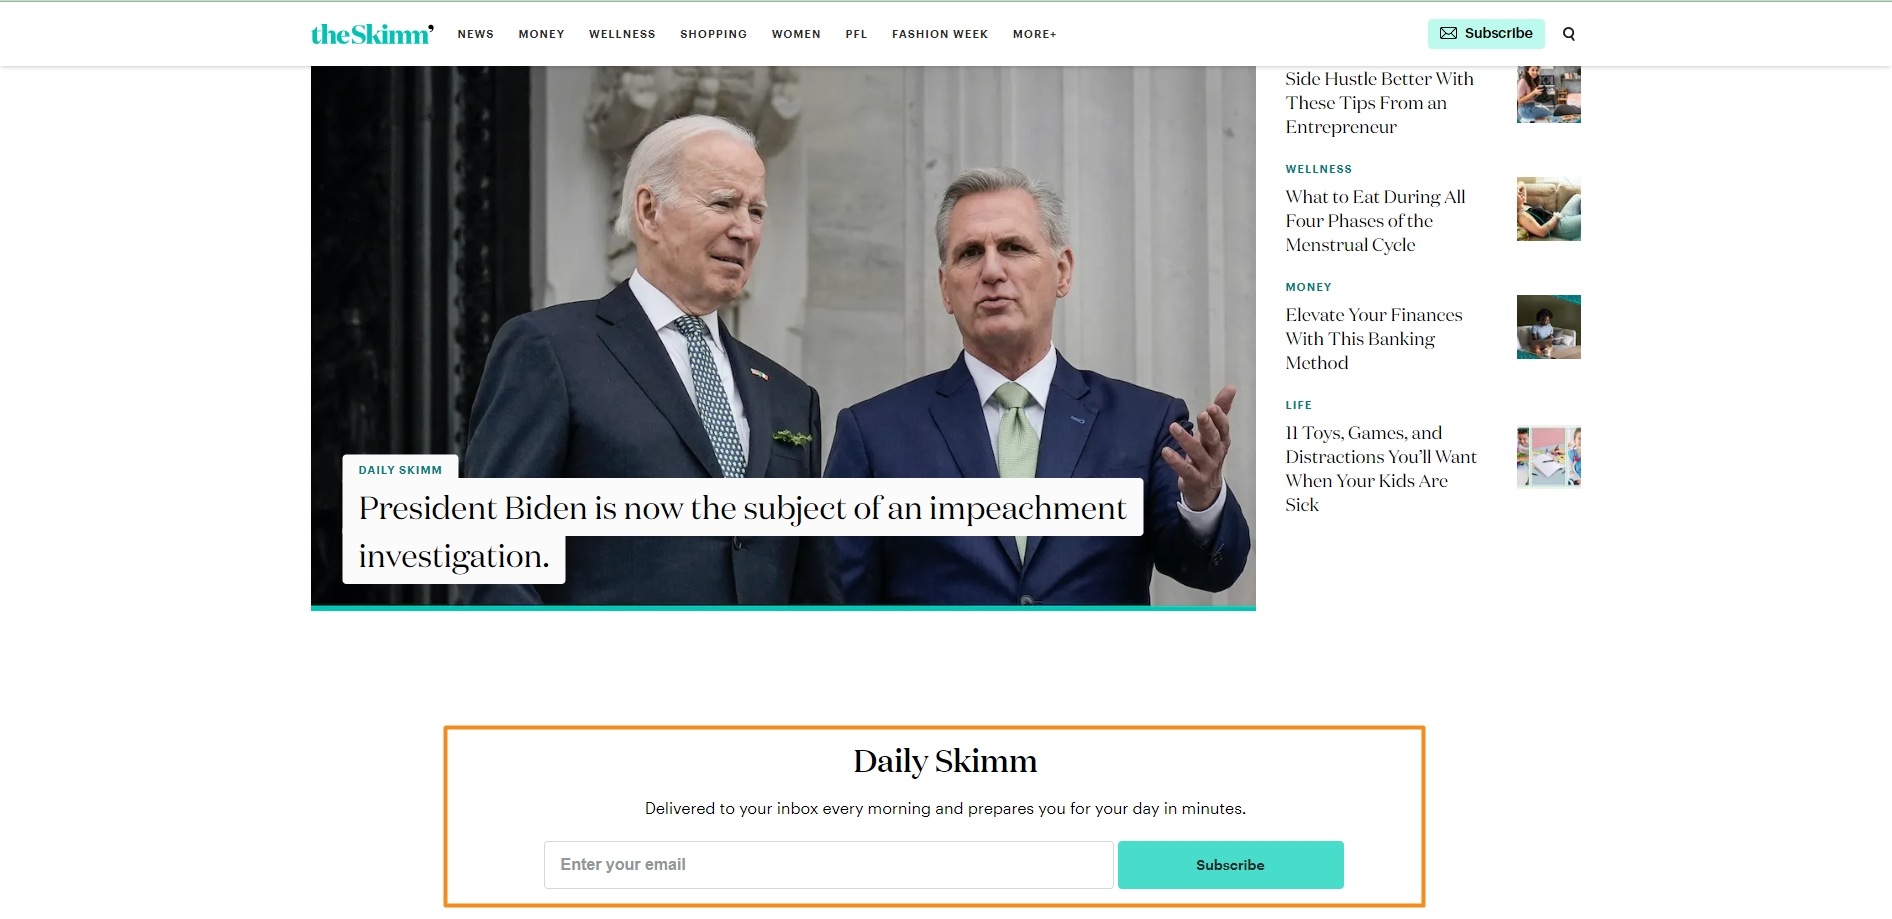 The Skimm offers a daily newsletter to those who enter their email and sign up, another example of a minimal sign up form